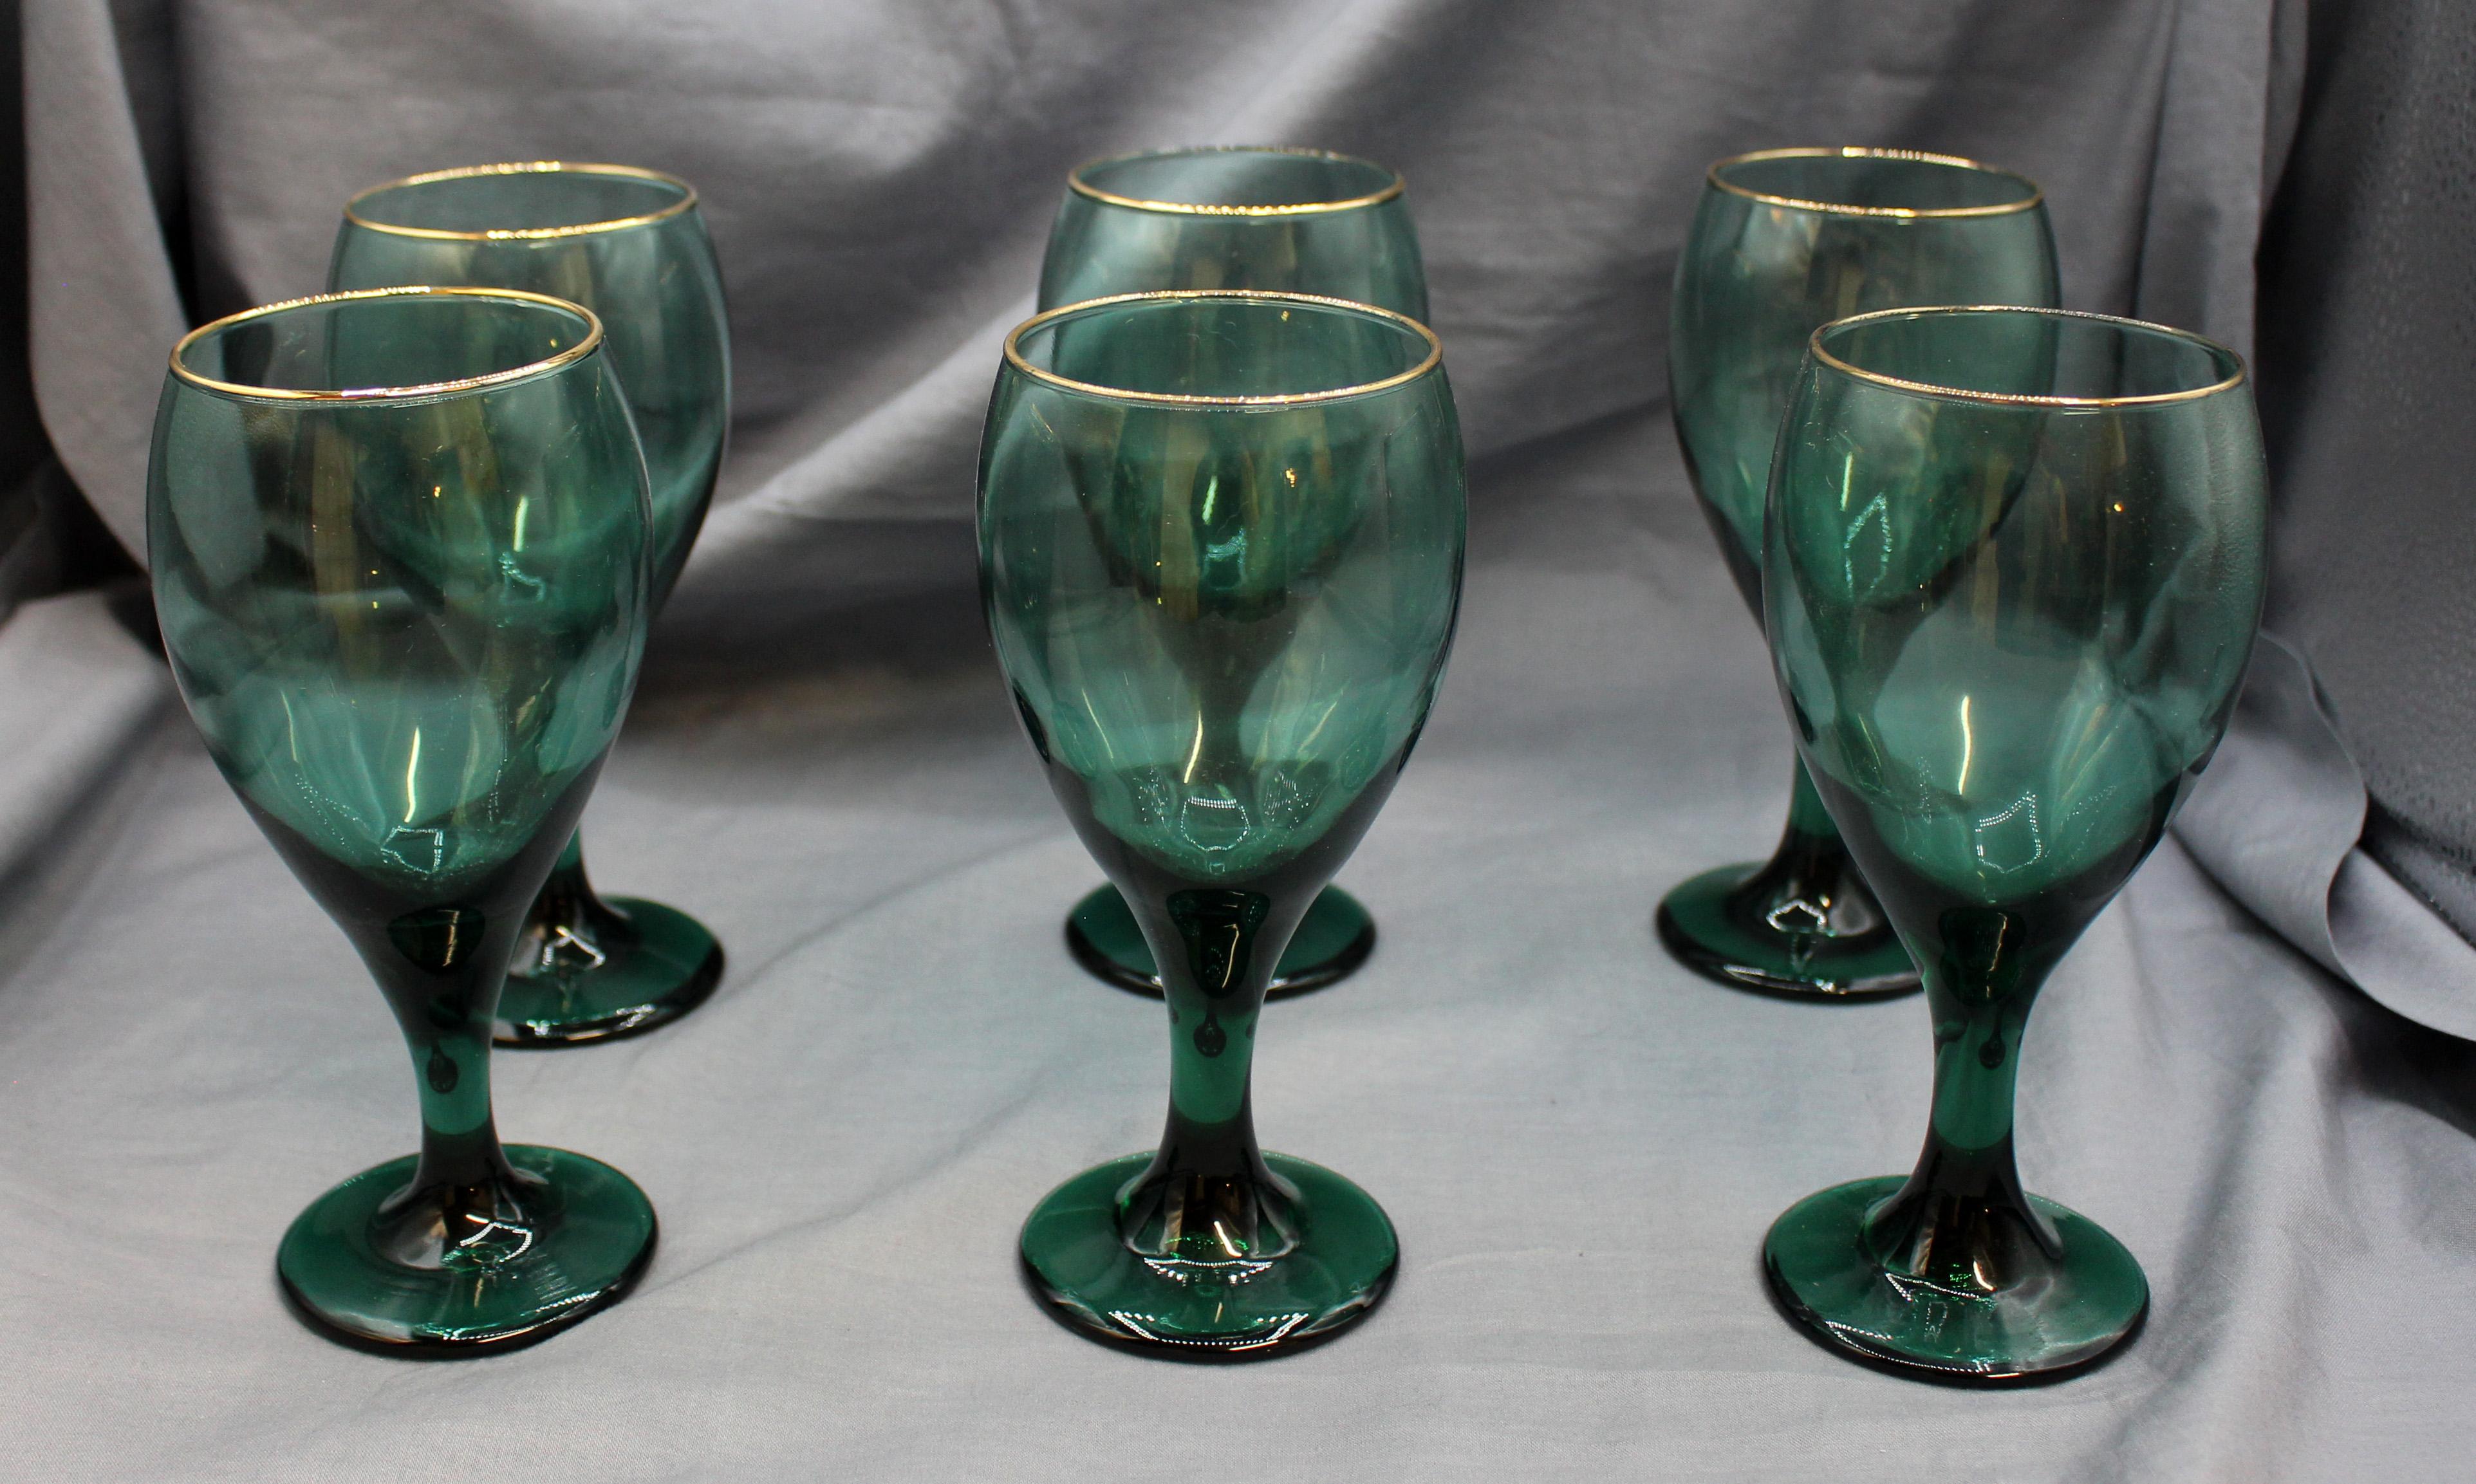 Vintage set of 6 signed Libbey sea foam green wine glasses with 22karat gilt rims. This mark introduced in 1955, cursive L in simple circle. Note the rim appears to be applied in solid gold.
6 7/8